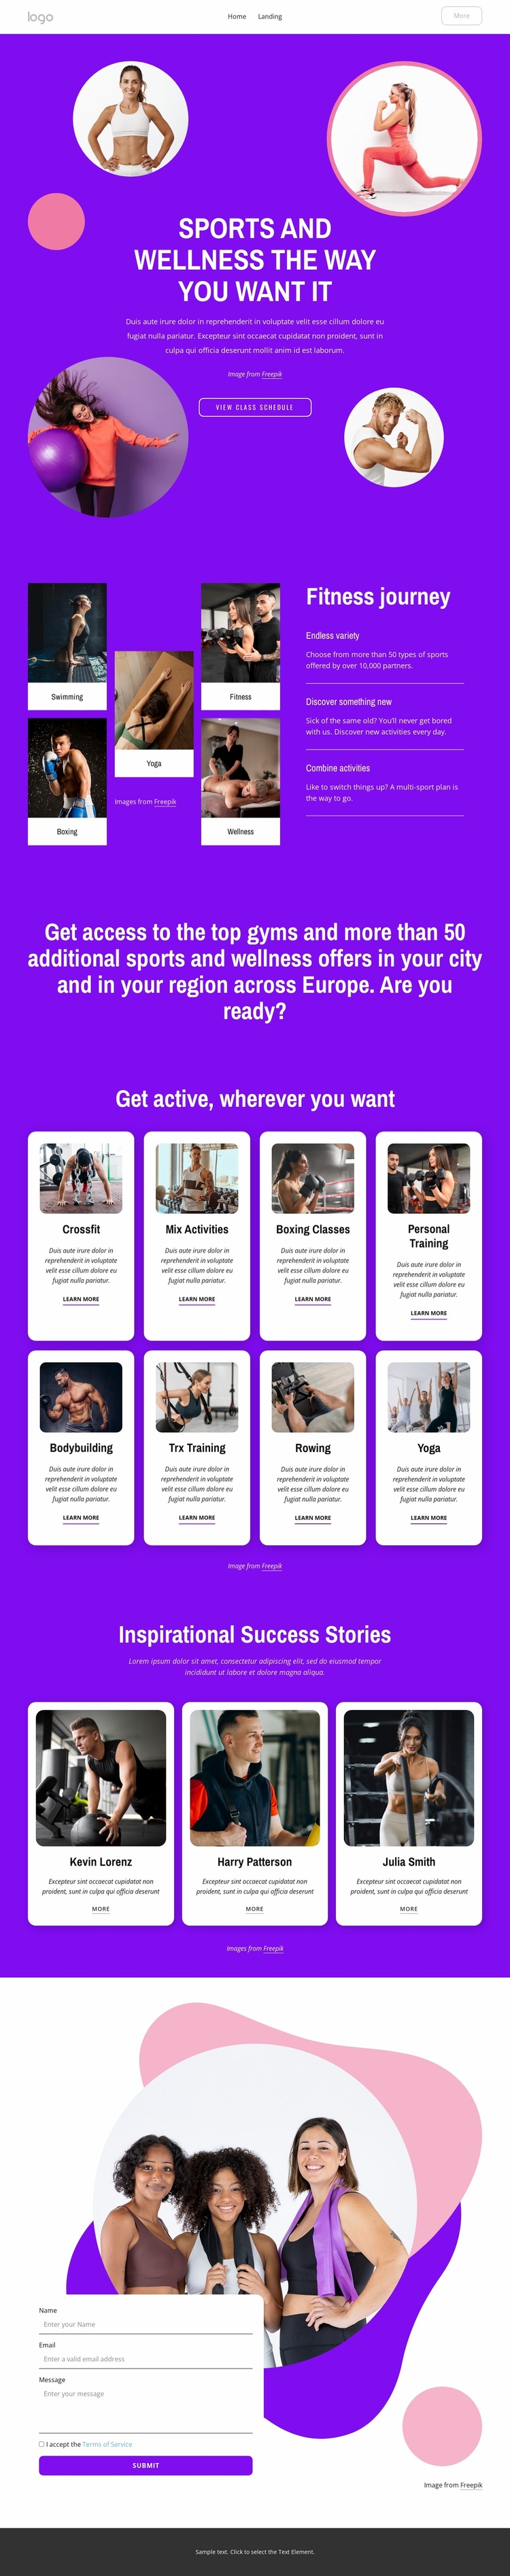 Sports and wellness the way you want it Website Design